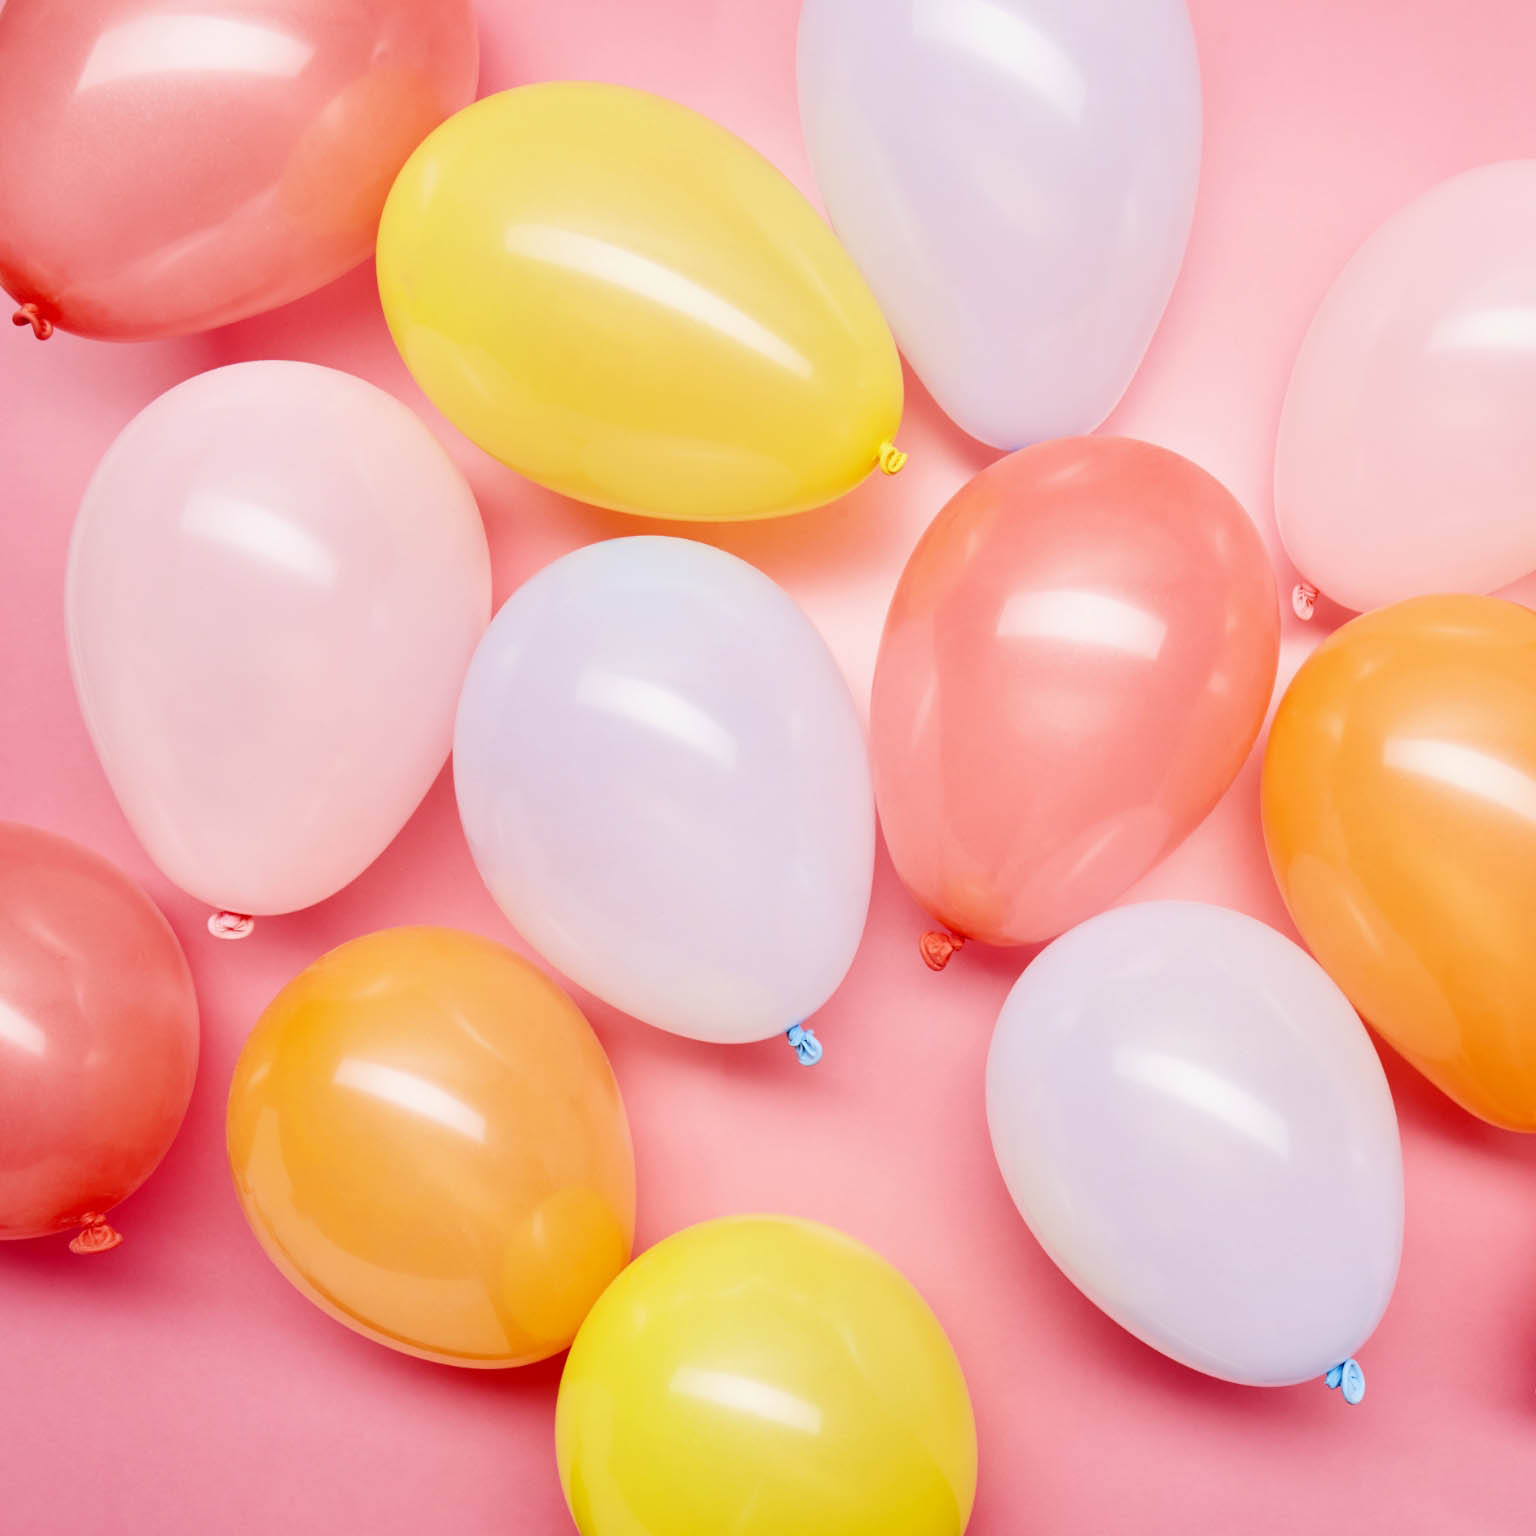 Multiple bright and colorful balloons